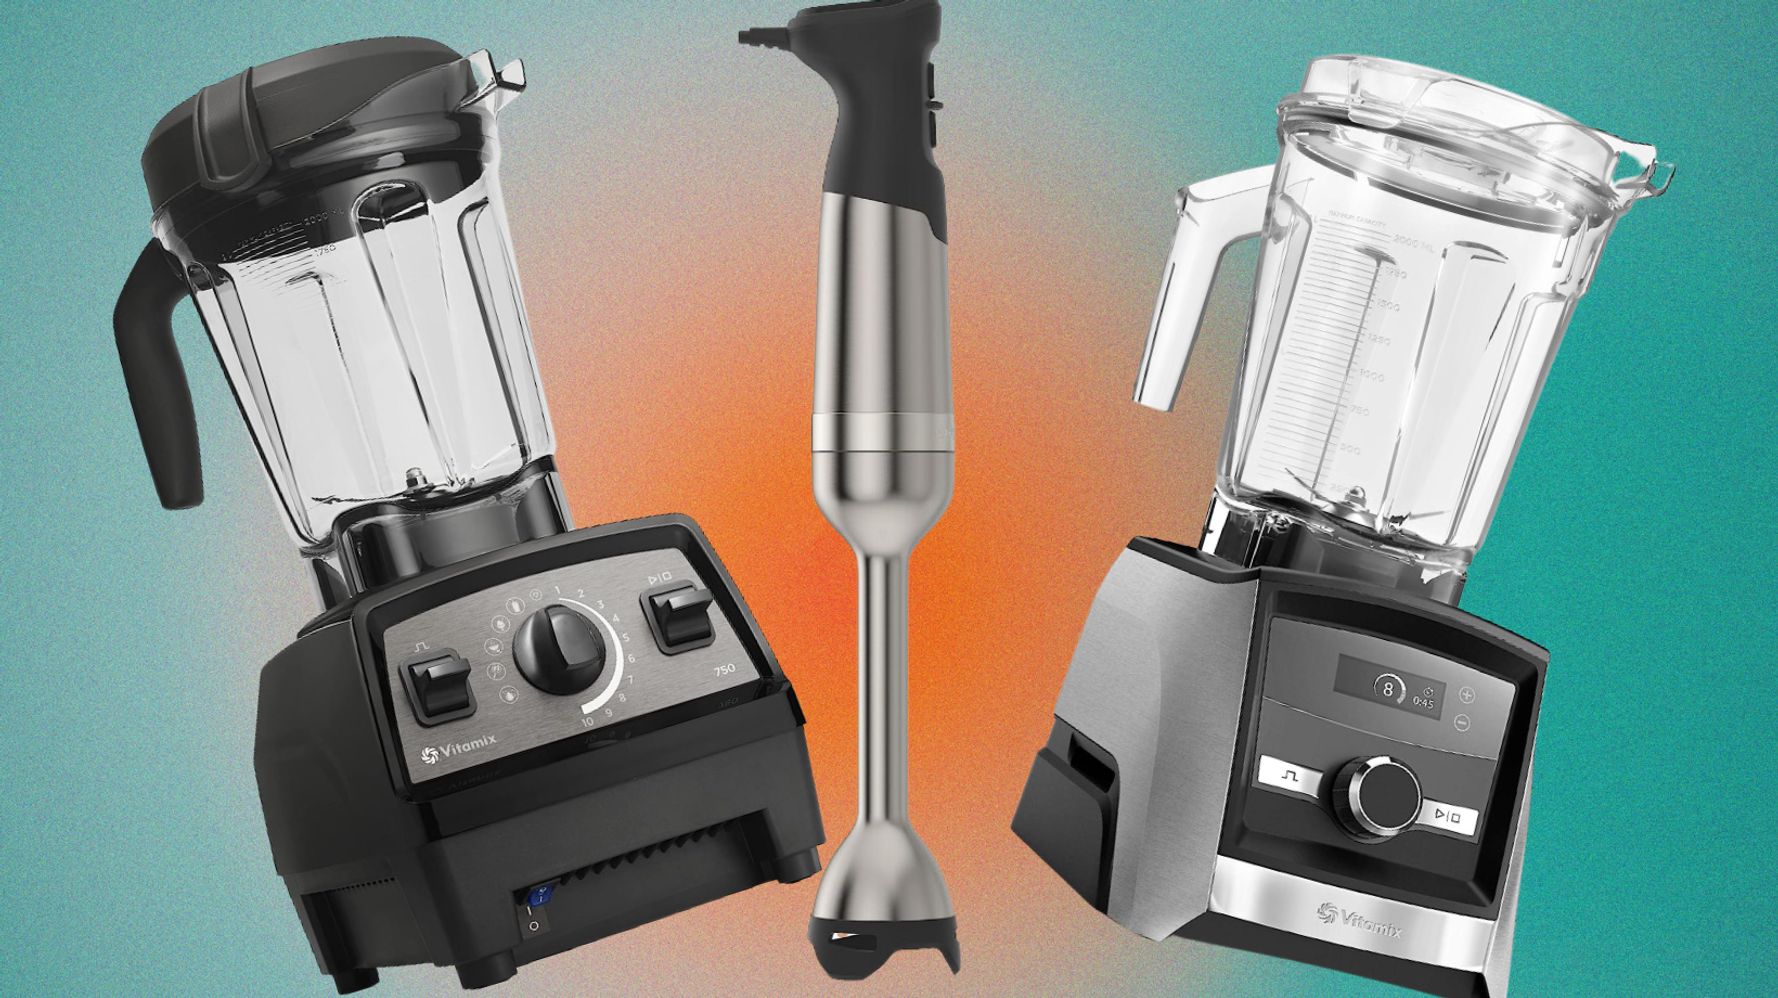 This Vitamix blender is on sale this  Prime Day 2022